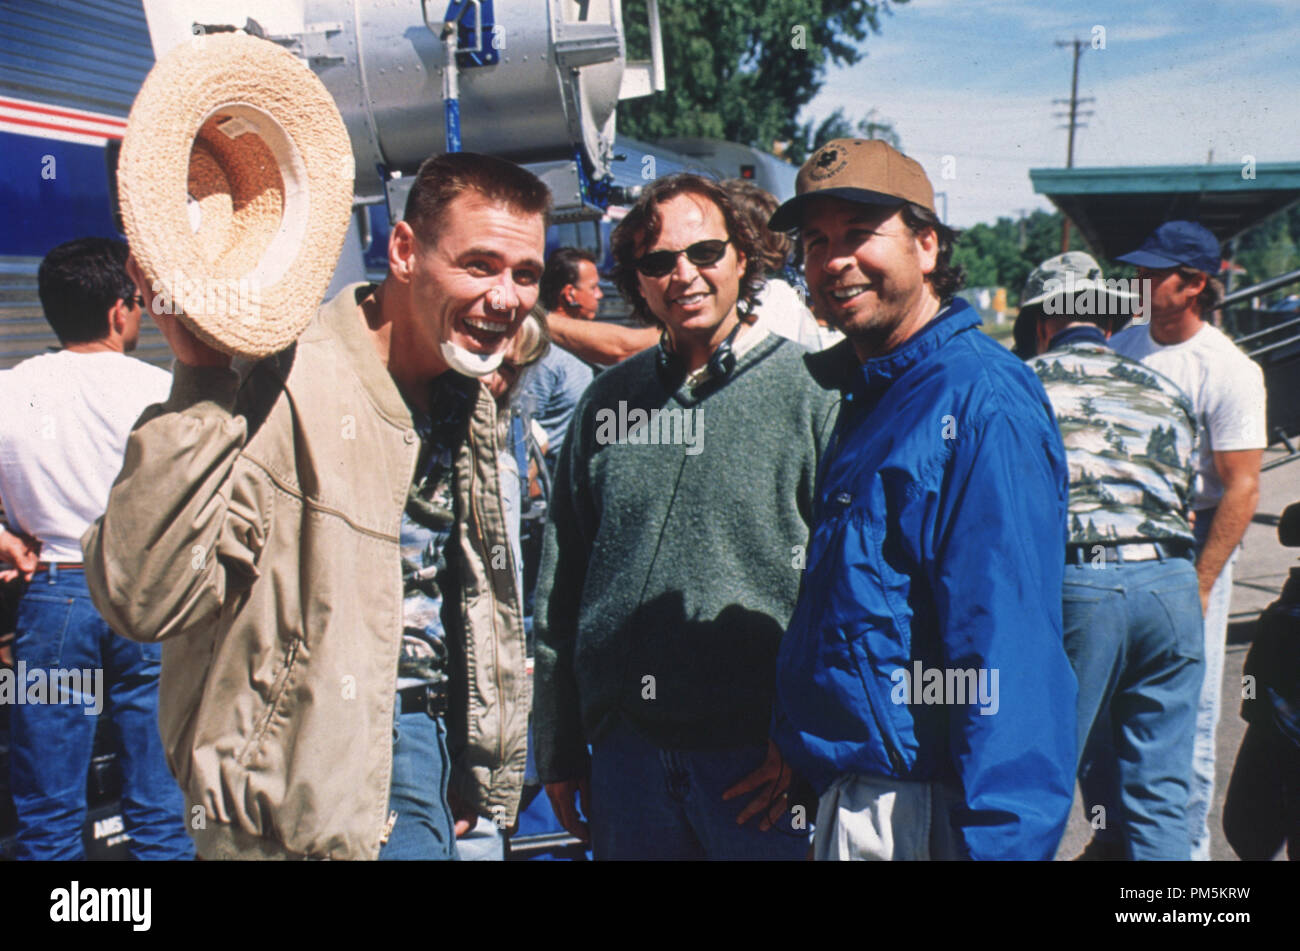 Film Still / Publicity Stills from 'Me, Myself and Irene'  Jim Carrey with director's Bobby and Peter Farrelly © 2000 20th Century Fox Photo Credit: Melinda Sue Gordon File Reference # 30846376THA  For Editorial Use Only -  All Rights Reserved Stock Photo